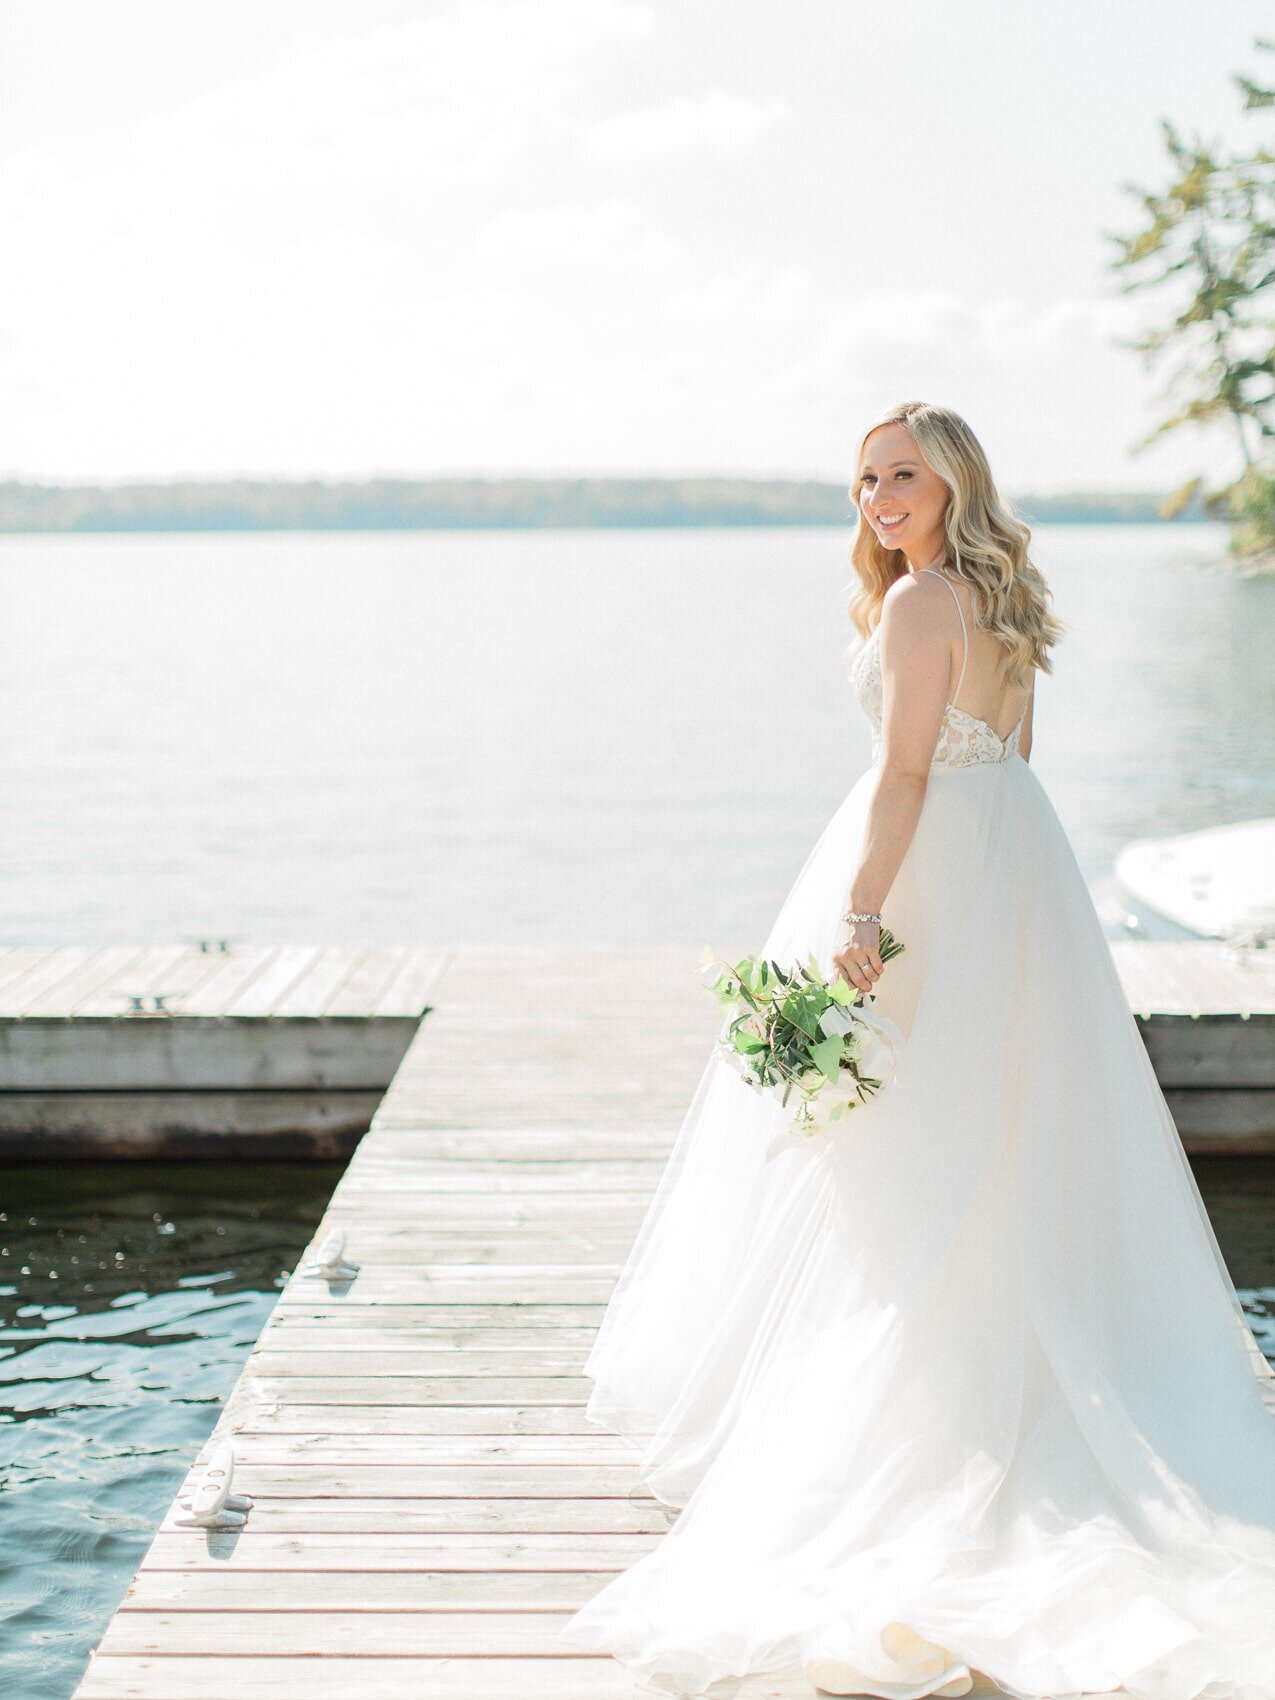 bride posing naturally for a candid happy photo on her wedding day at windermere house muskoka